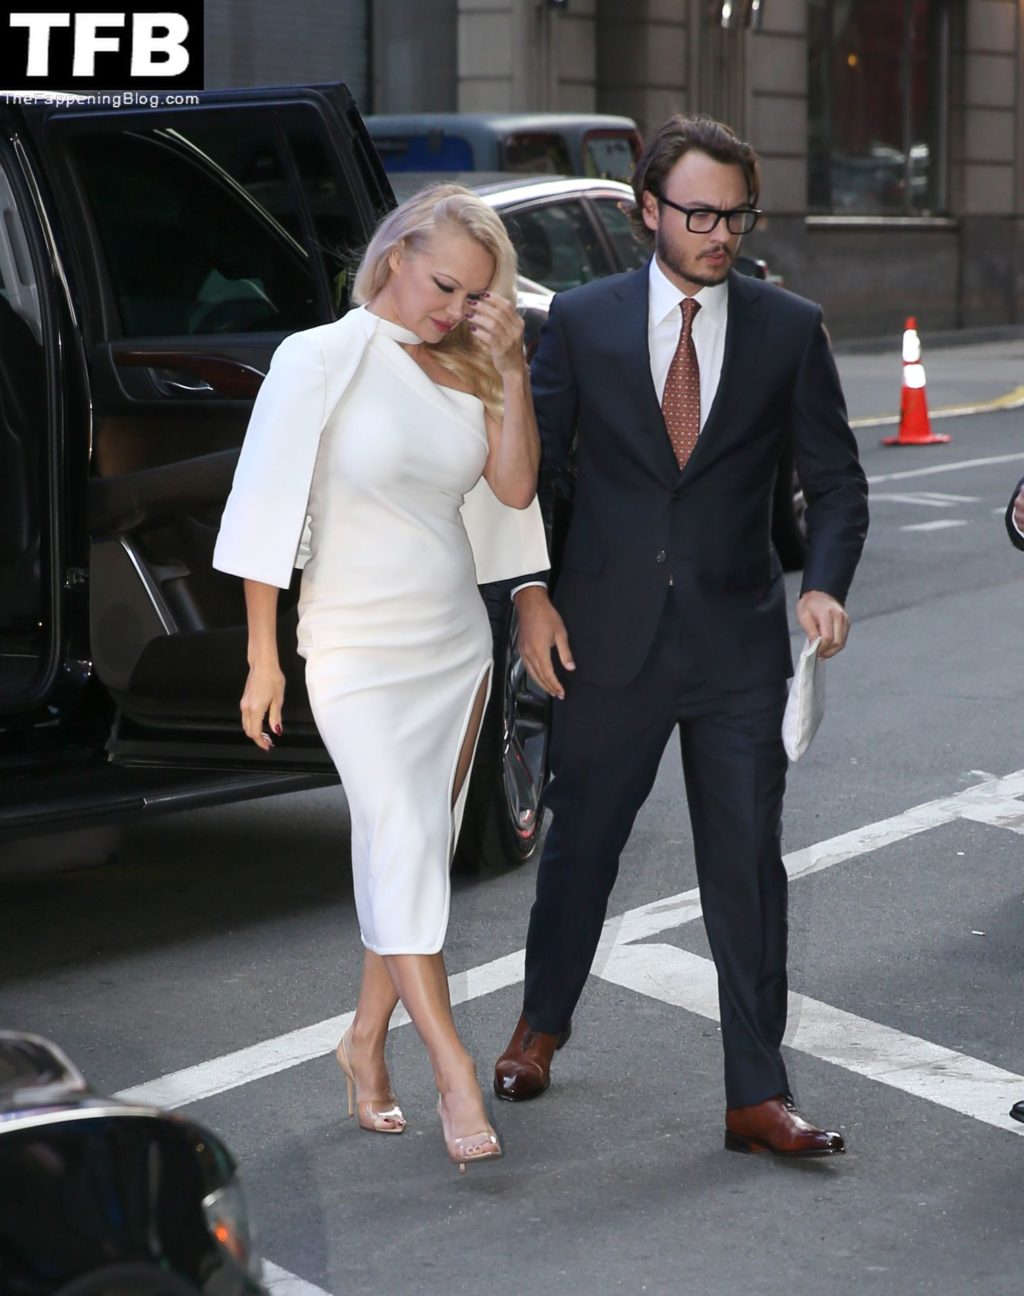 Pamela Anderson Sexy The Fappening Blog 42 1024x1296 - Pamela Anderson Heads to Good Morning America (107 Photos + Video)